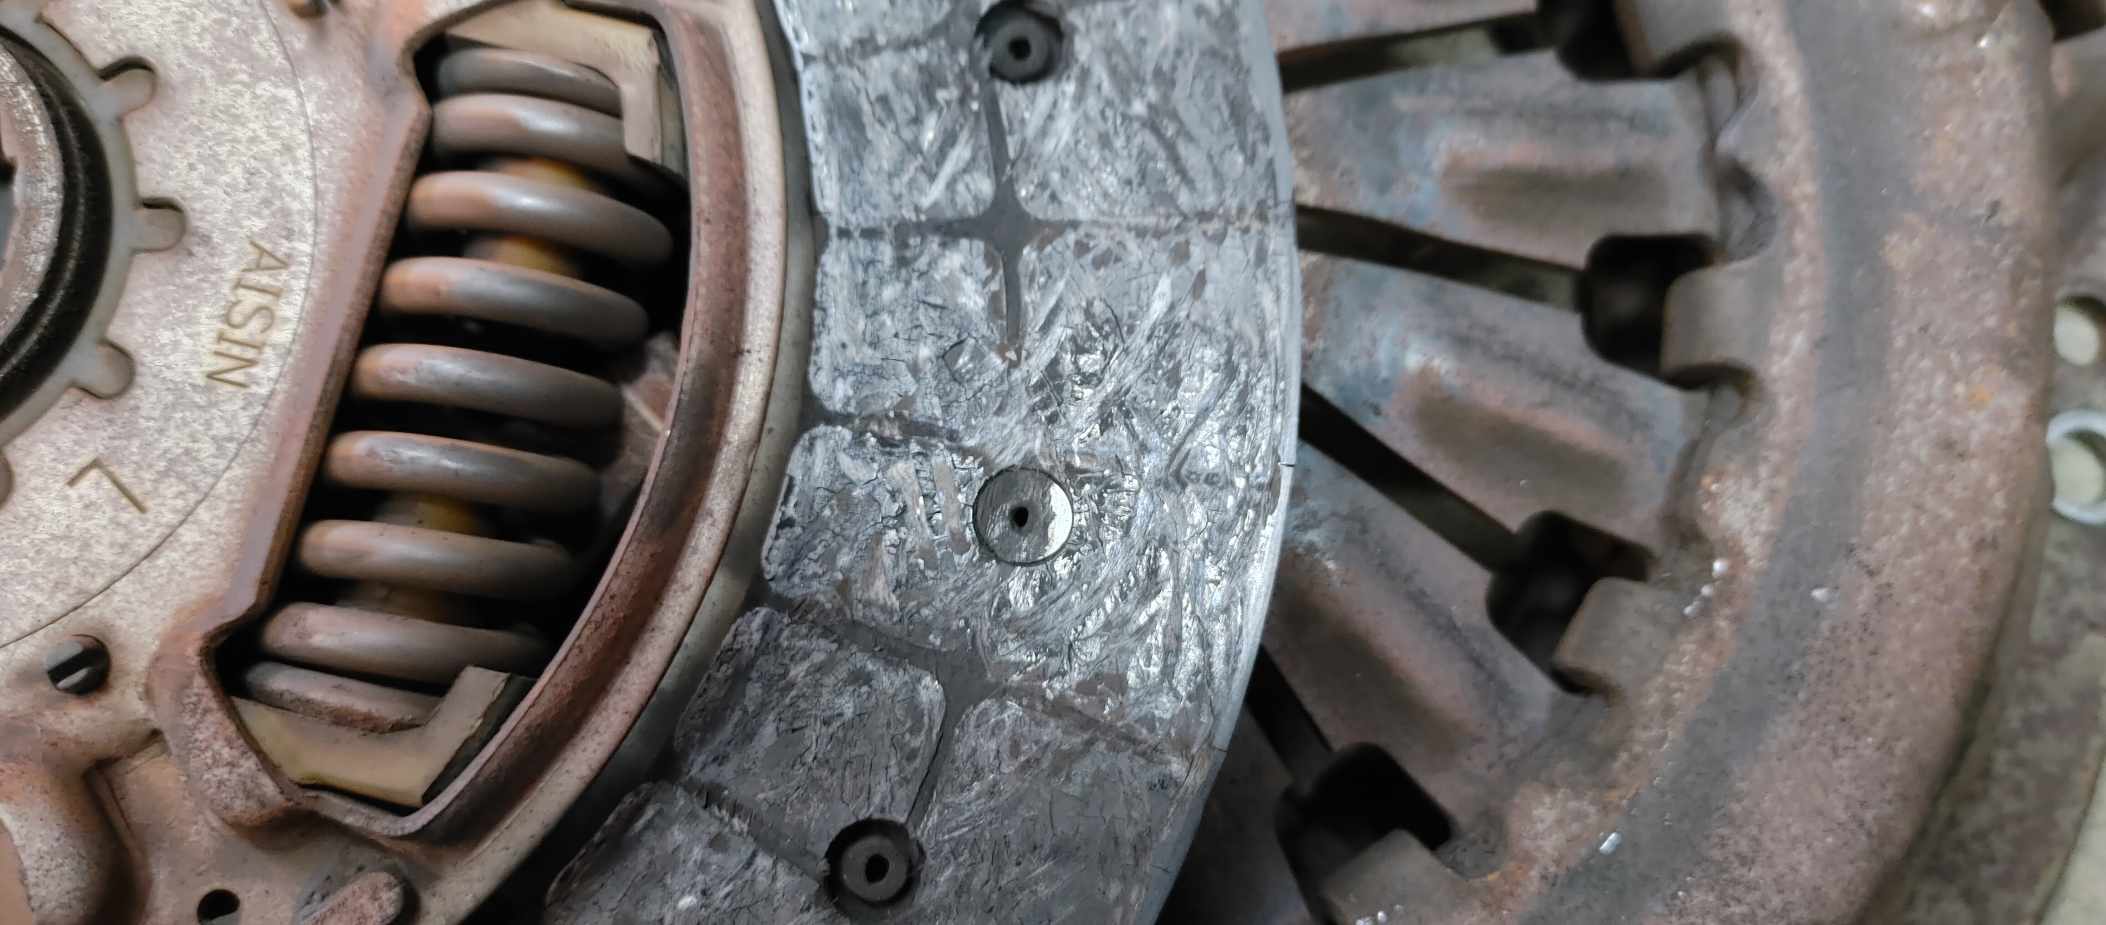 Here you can see my original clutch disk it was worn down to the rivets.